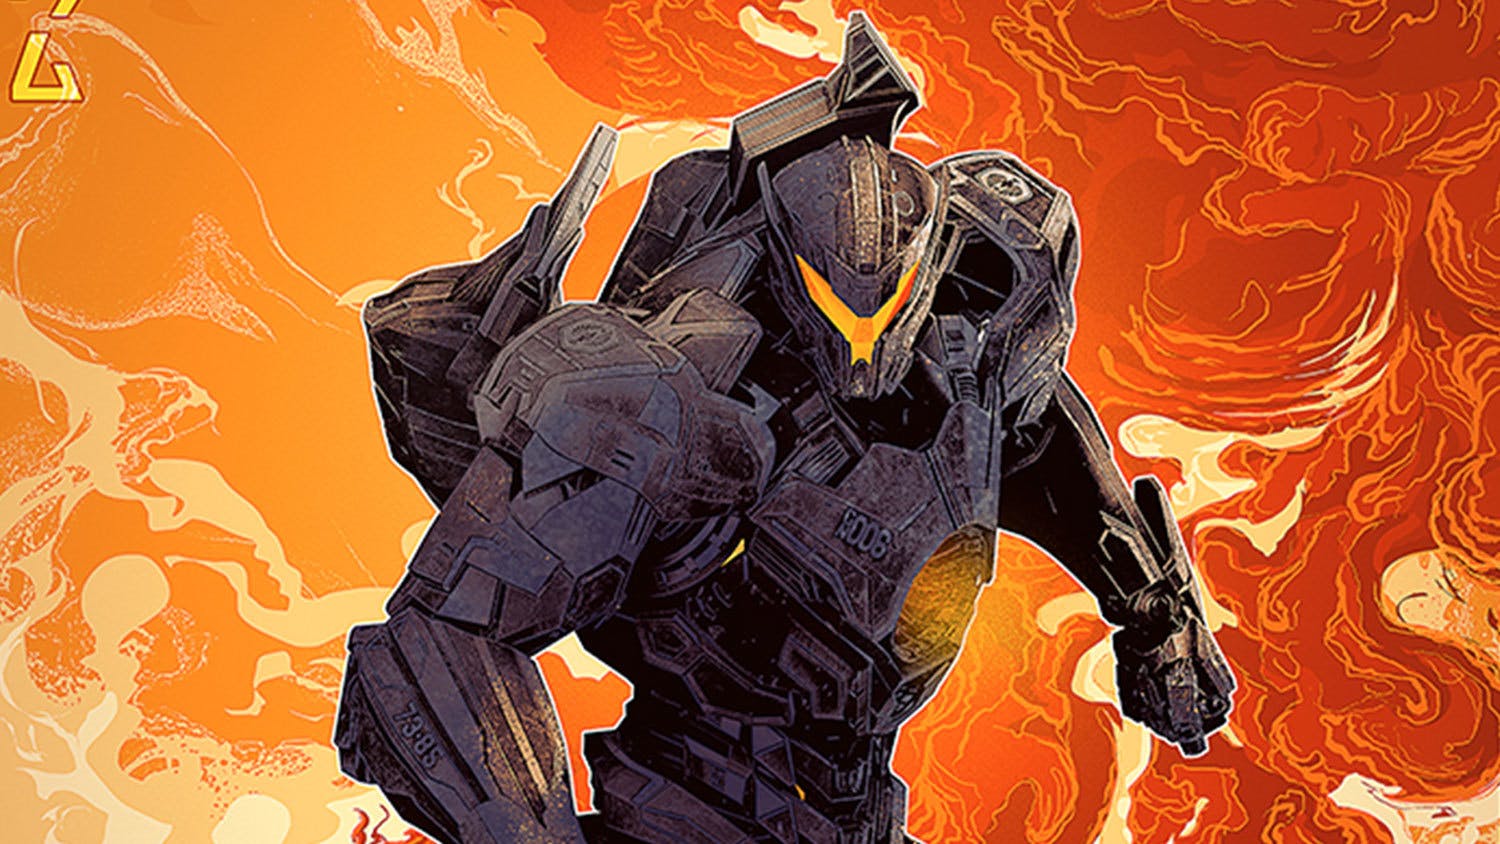 Pacific Rim: The Black - Who Is 'Boy' and What's His Secret?